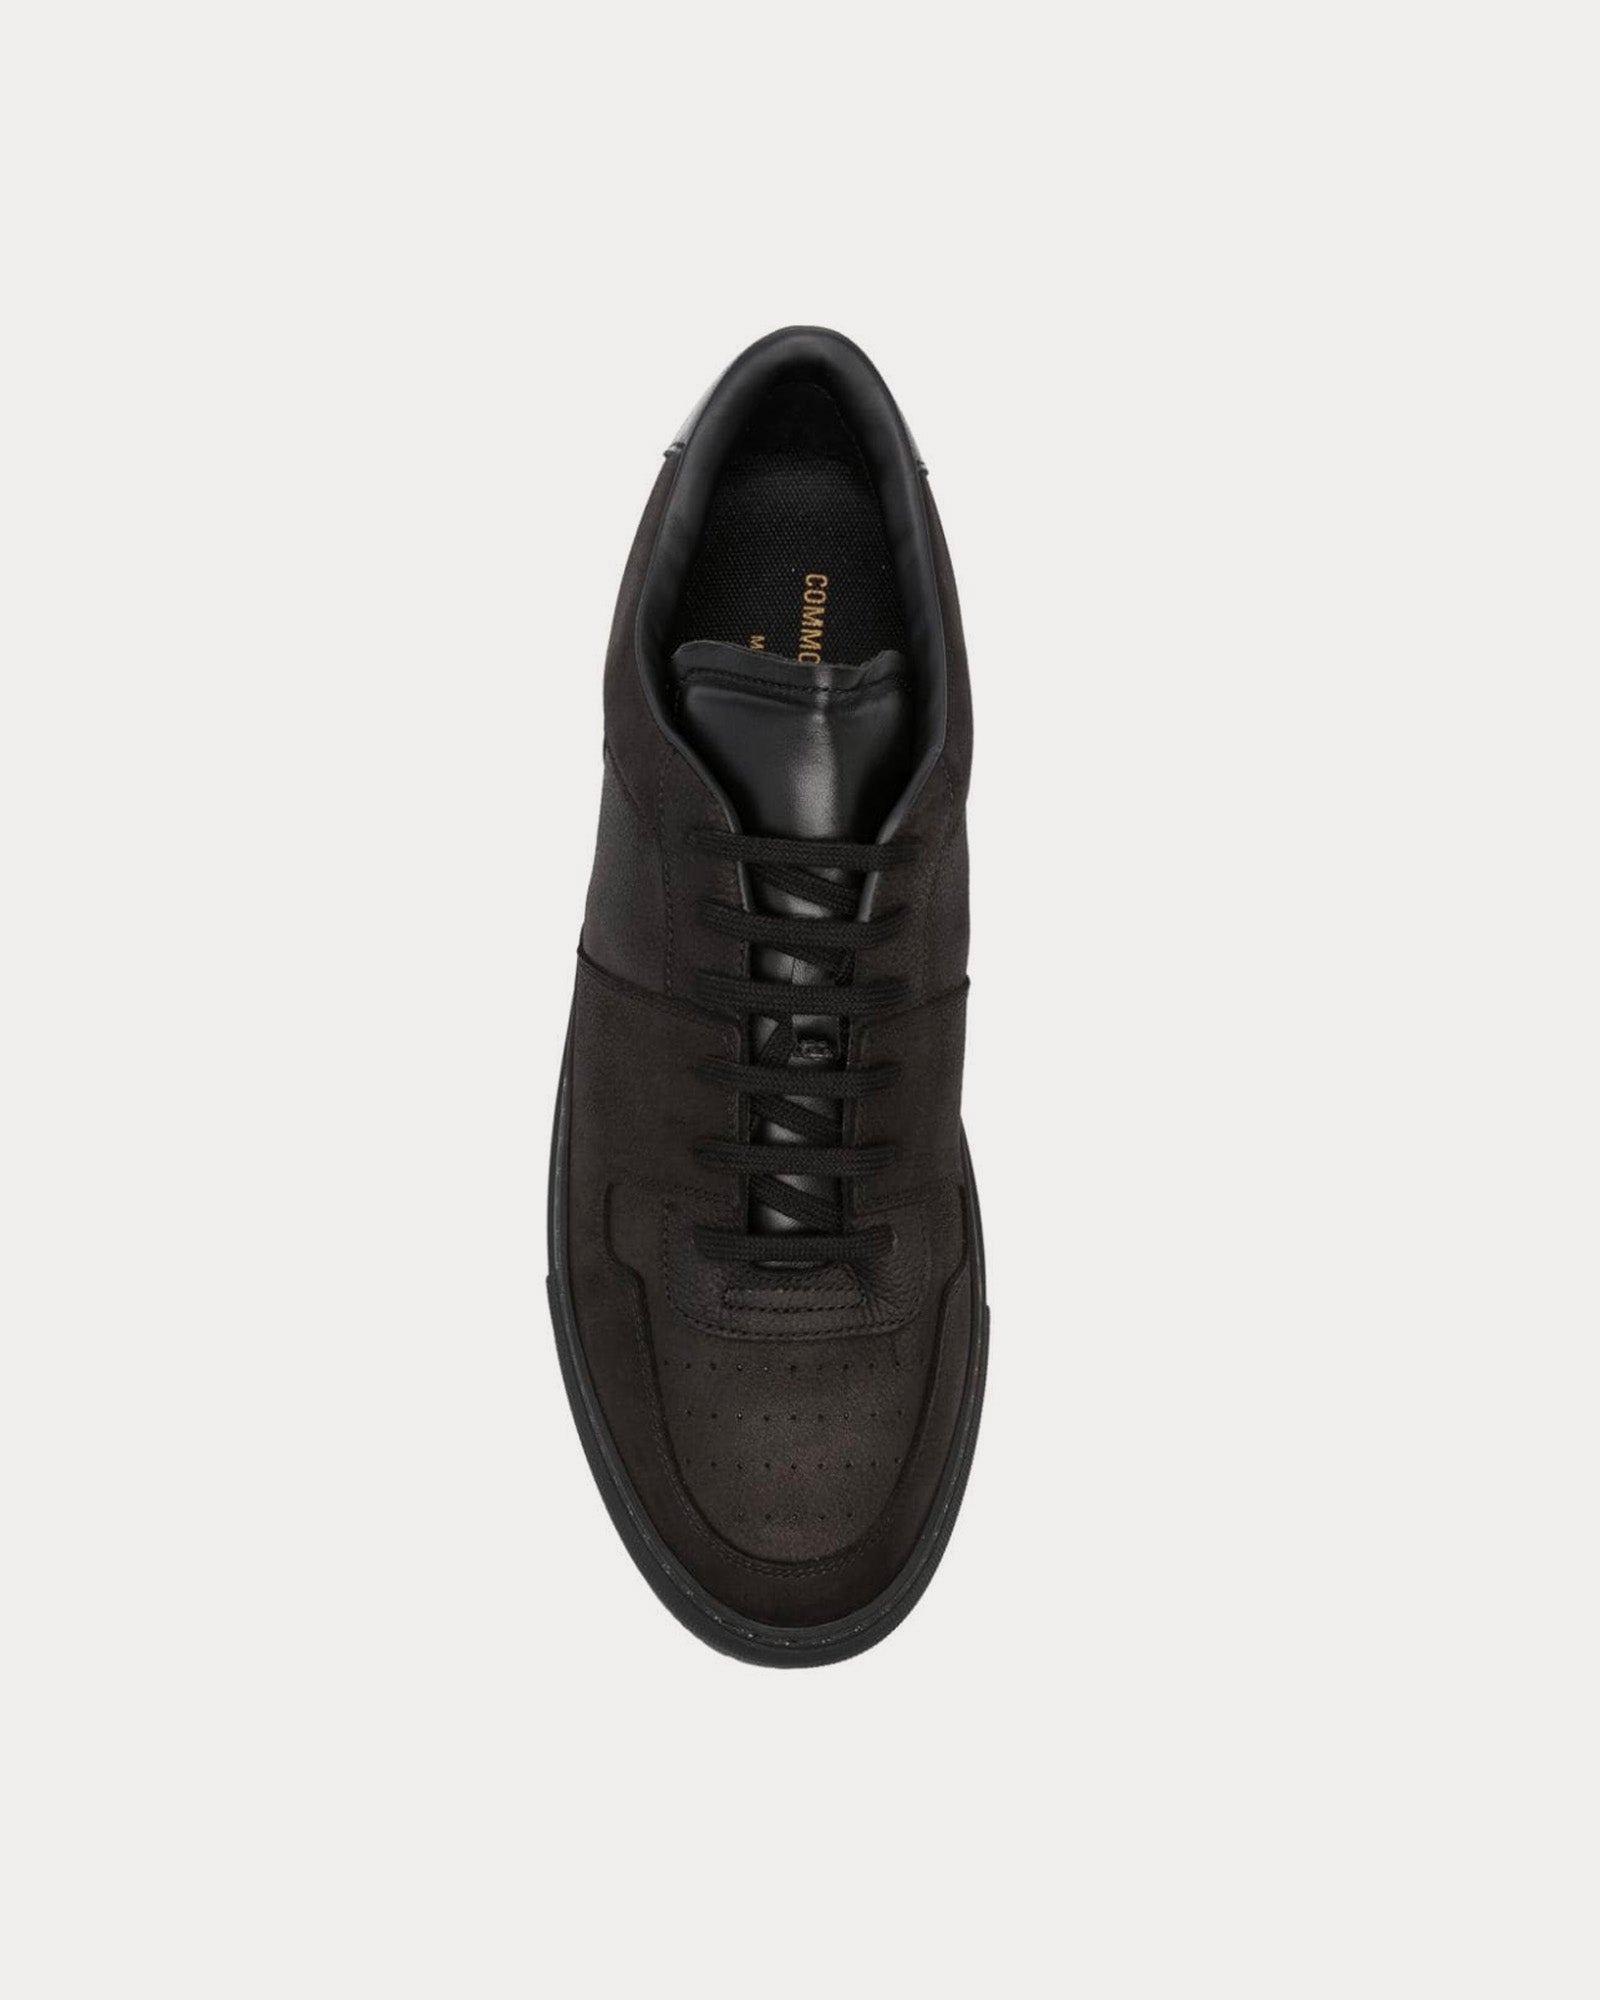 Common Projects - Decades Calf-Leather Black / Black Low Top Sneakers